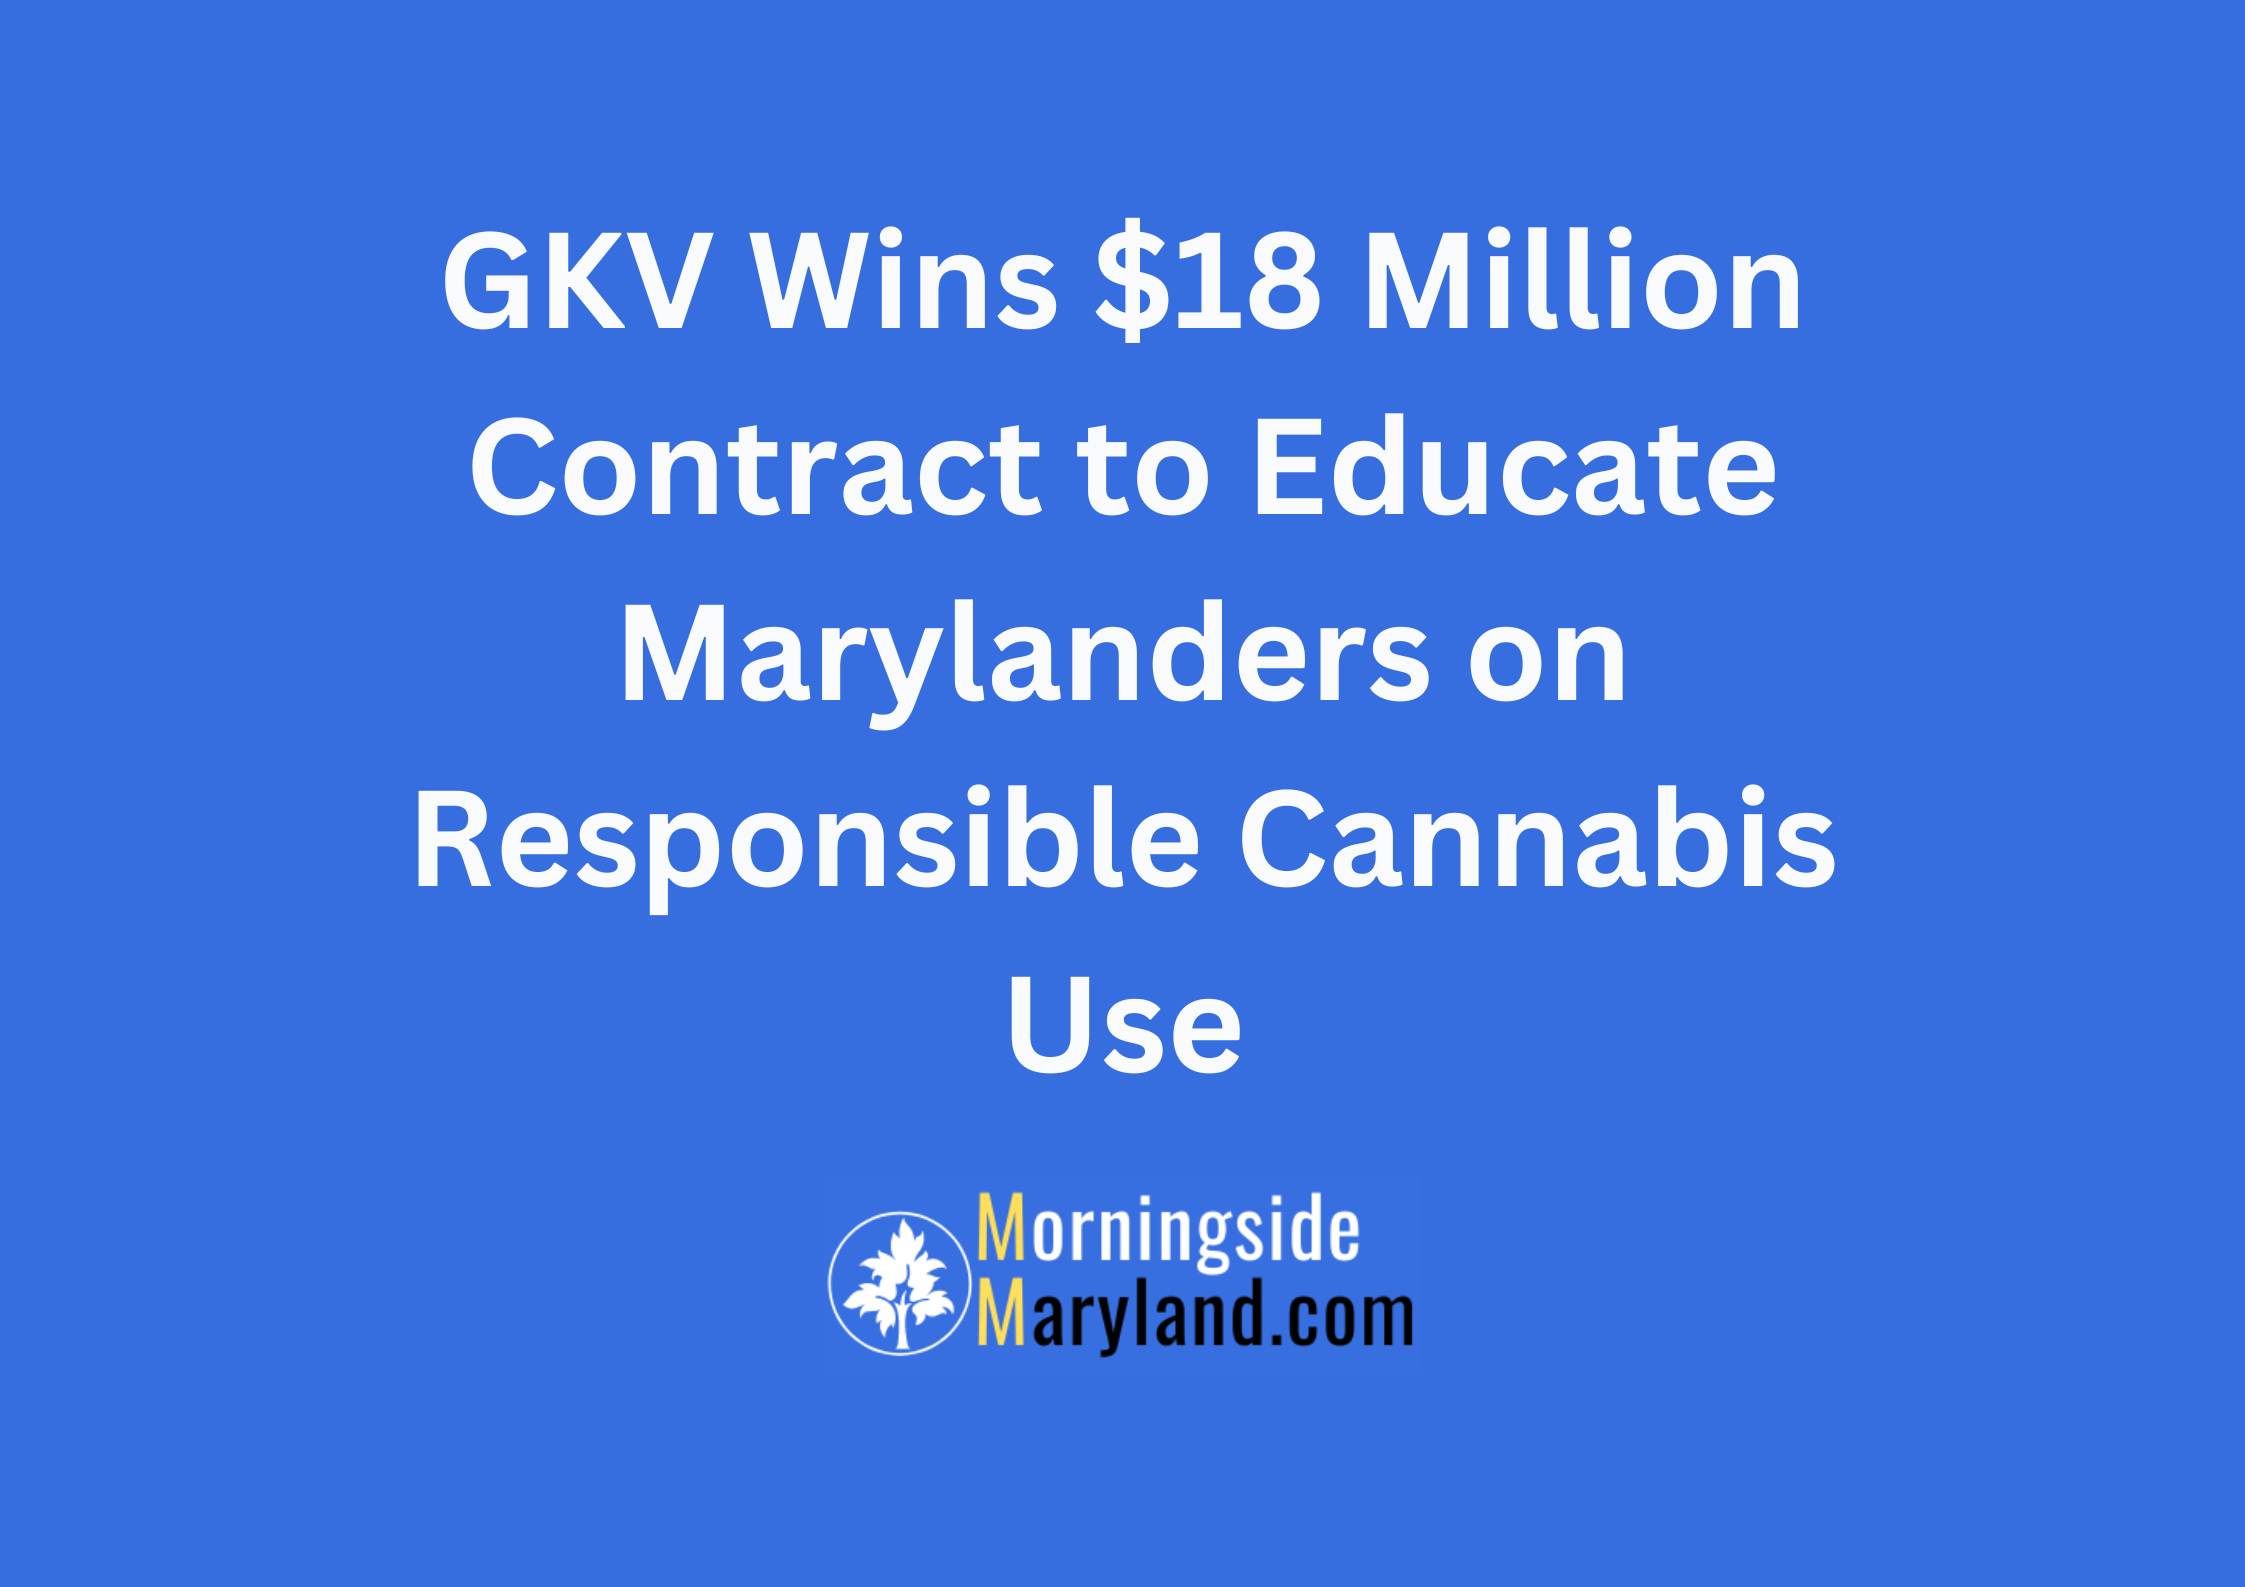 GKV Wins $18 Million Contract to Educate Marylanders on Responsible Cannabis Use